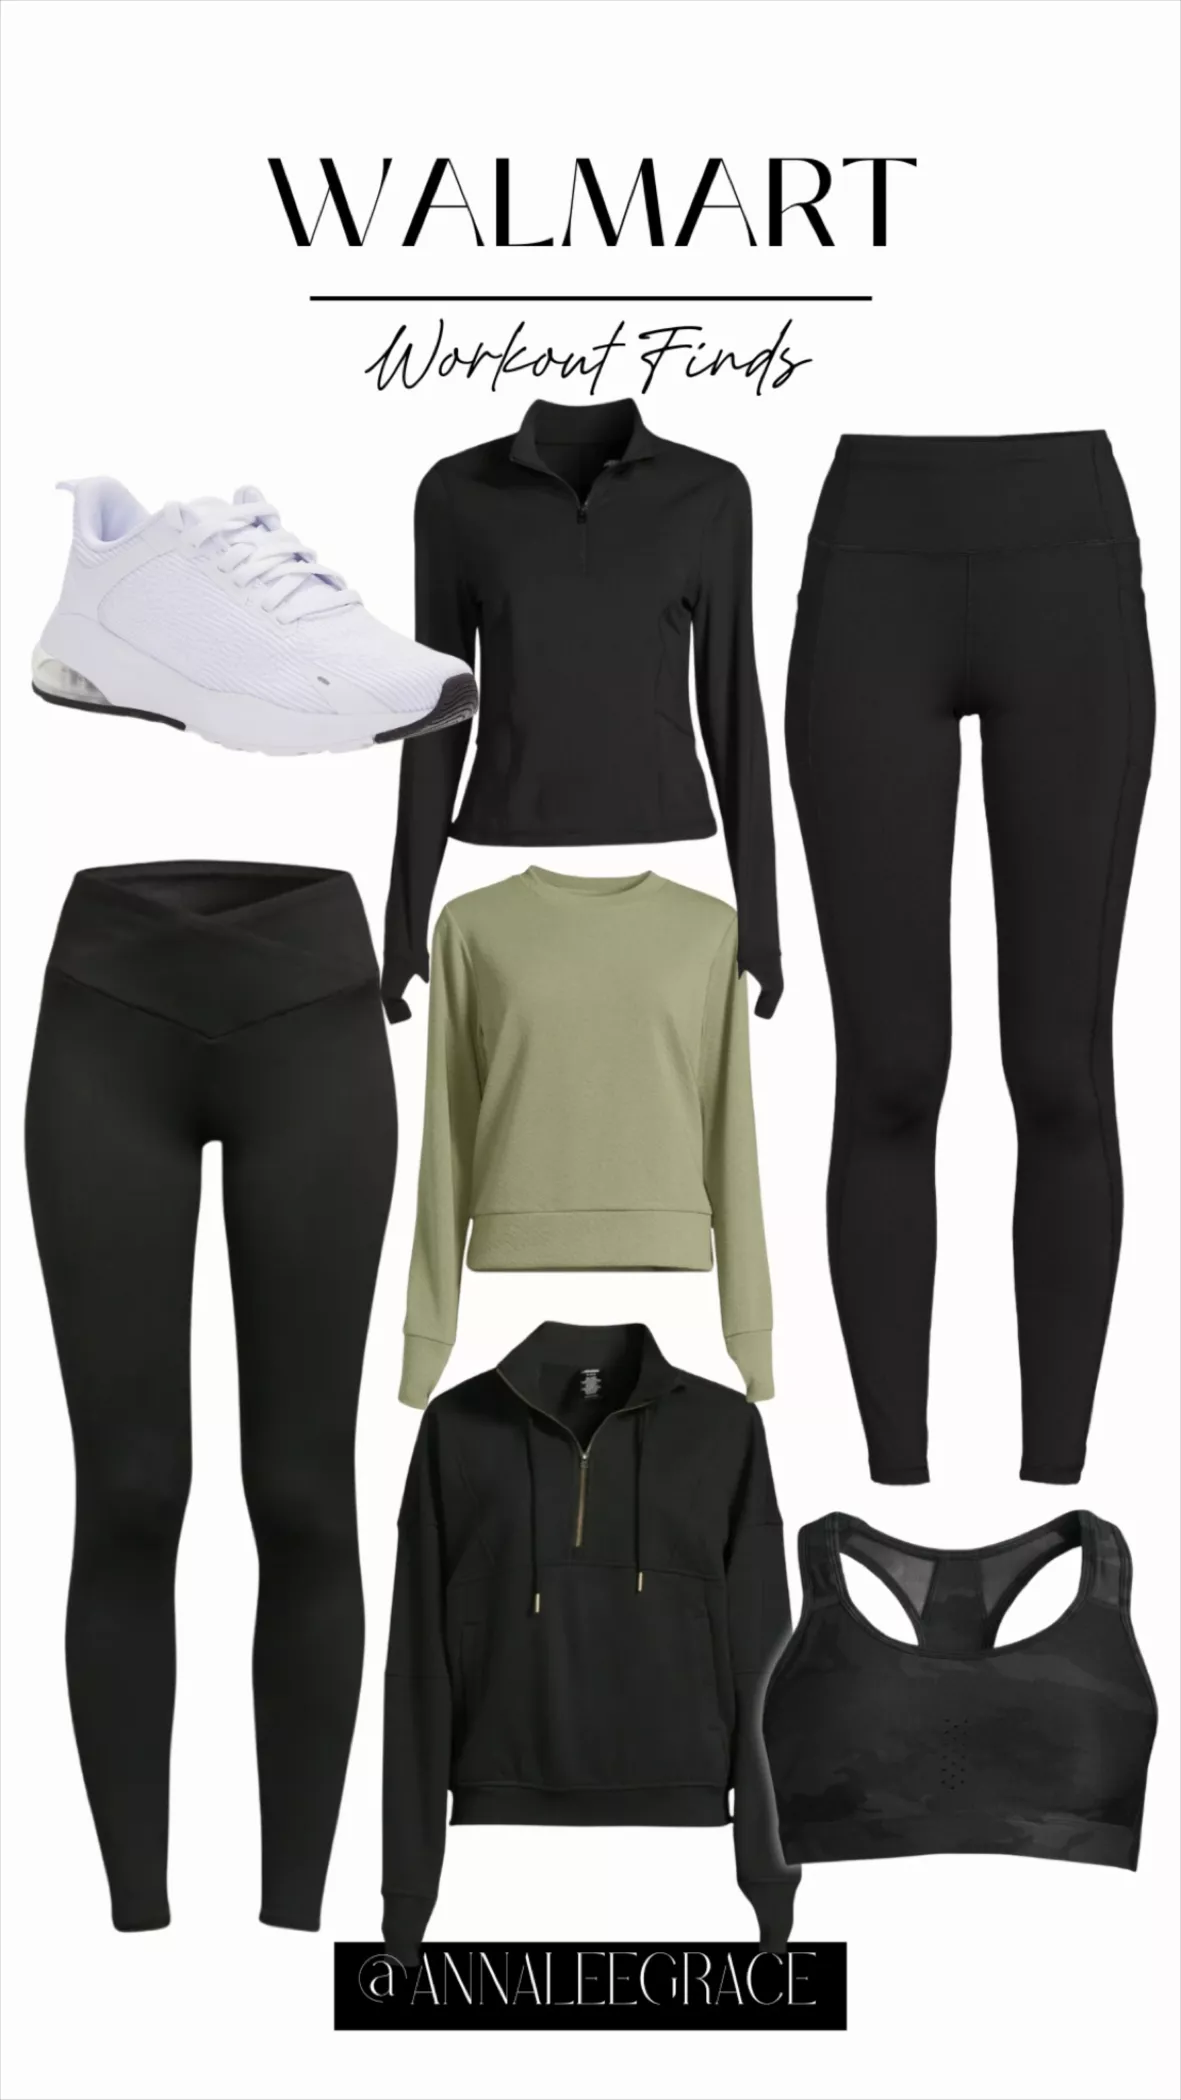 Avia Women's Ribbed Leggings with … curated on LTK